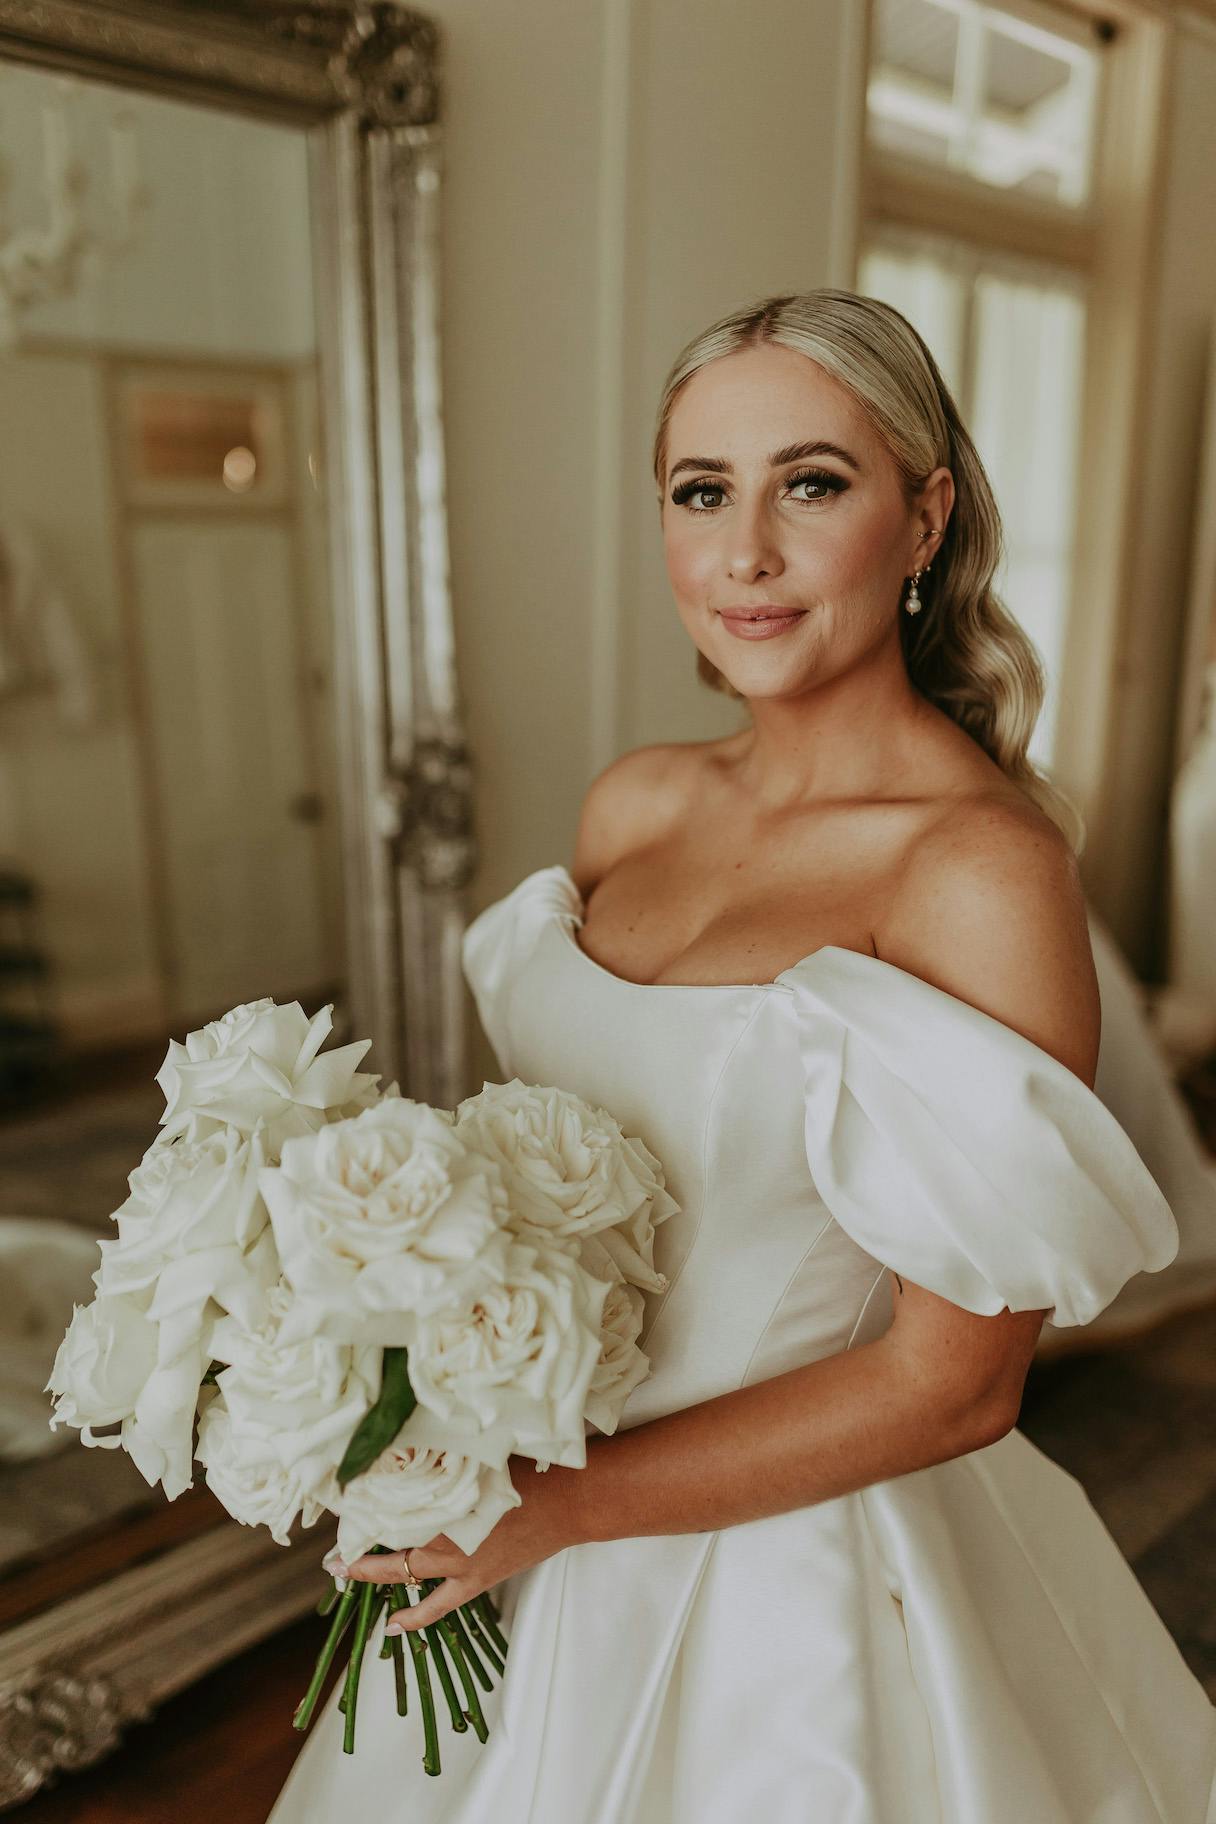 A bride wearing an off-the-shoulder white wedding dress holds a bouquet of white roses. She stands in front of a large ornate mirror and smiles softly, with blonde hair styled in loose waves. The room behind her has elegant decor and soft lighting.